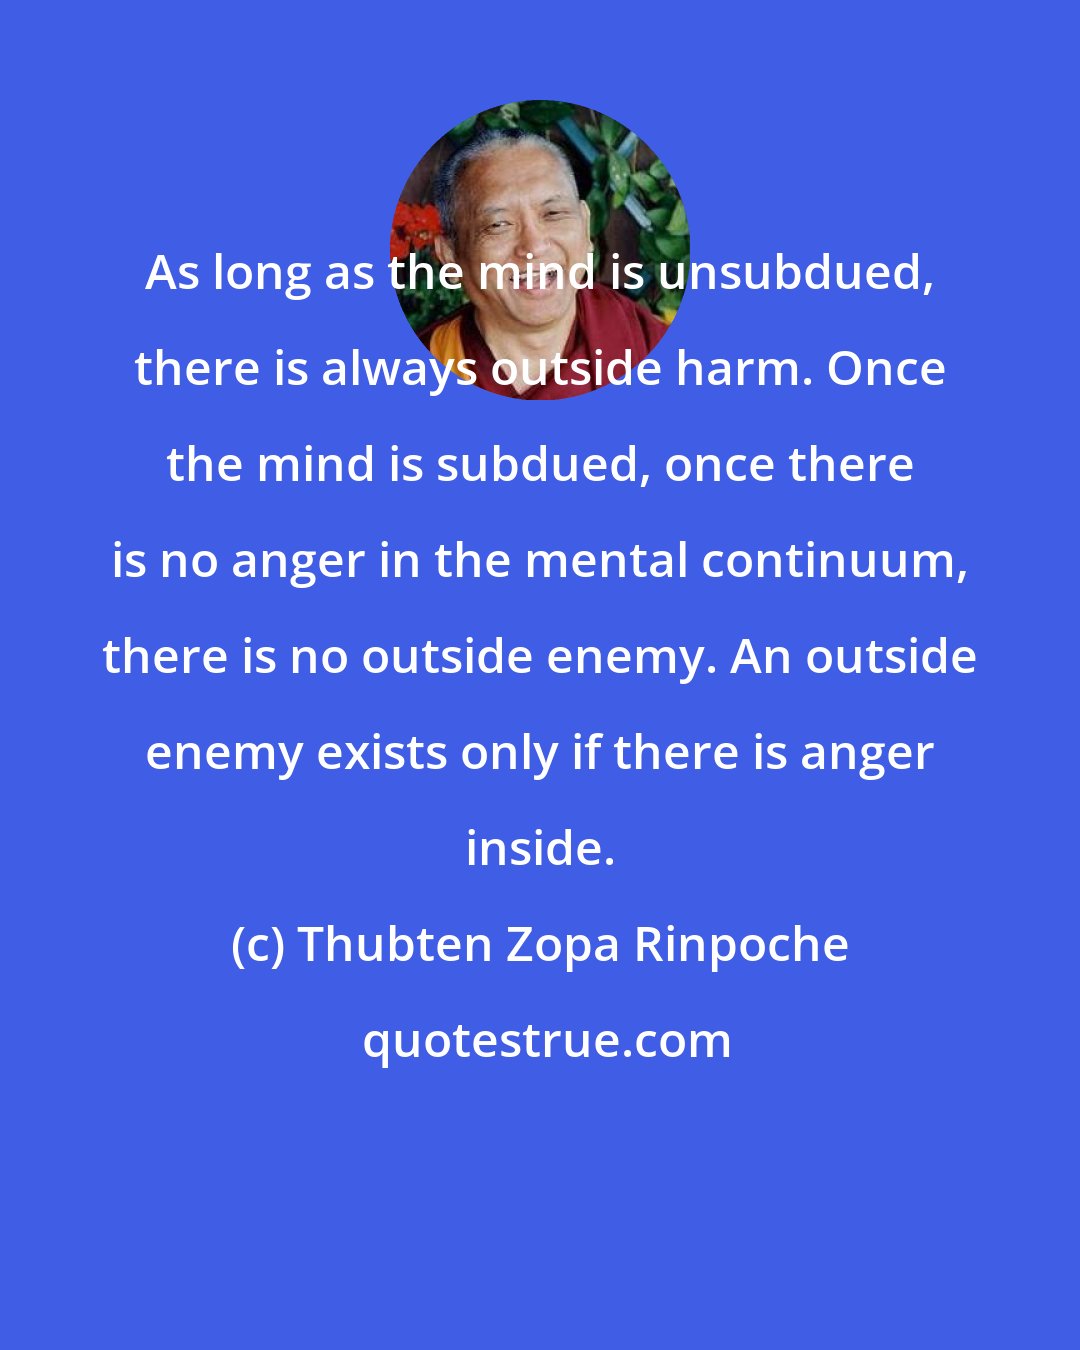 Thubten Zopa Rinpoche: As long as the mind is unsubdued, there is always outside harm. Once the mind is subdued, once there is no anger in the mental continuum, there is no outside enemy. An outside enemy exists only if there is anger inside.